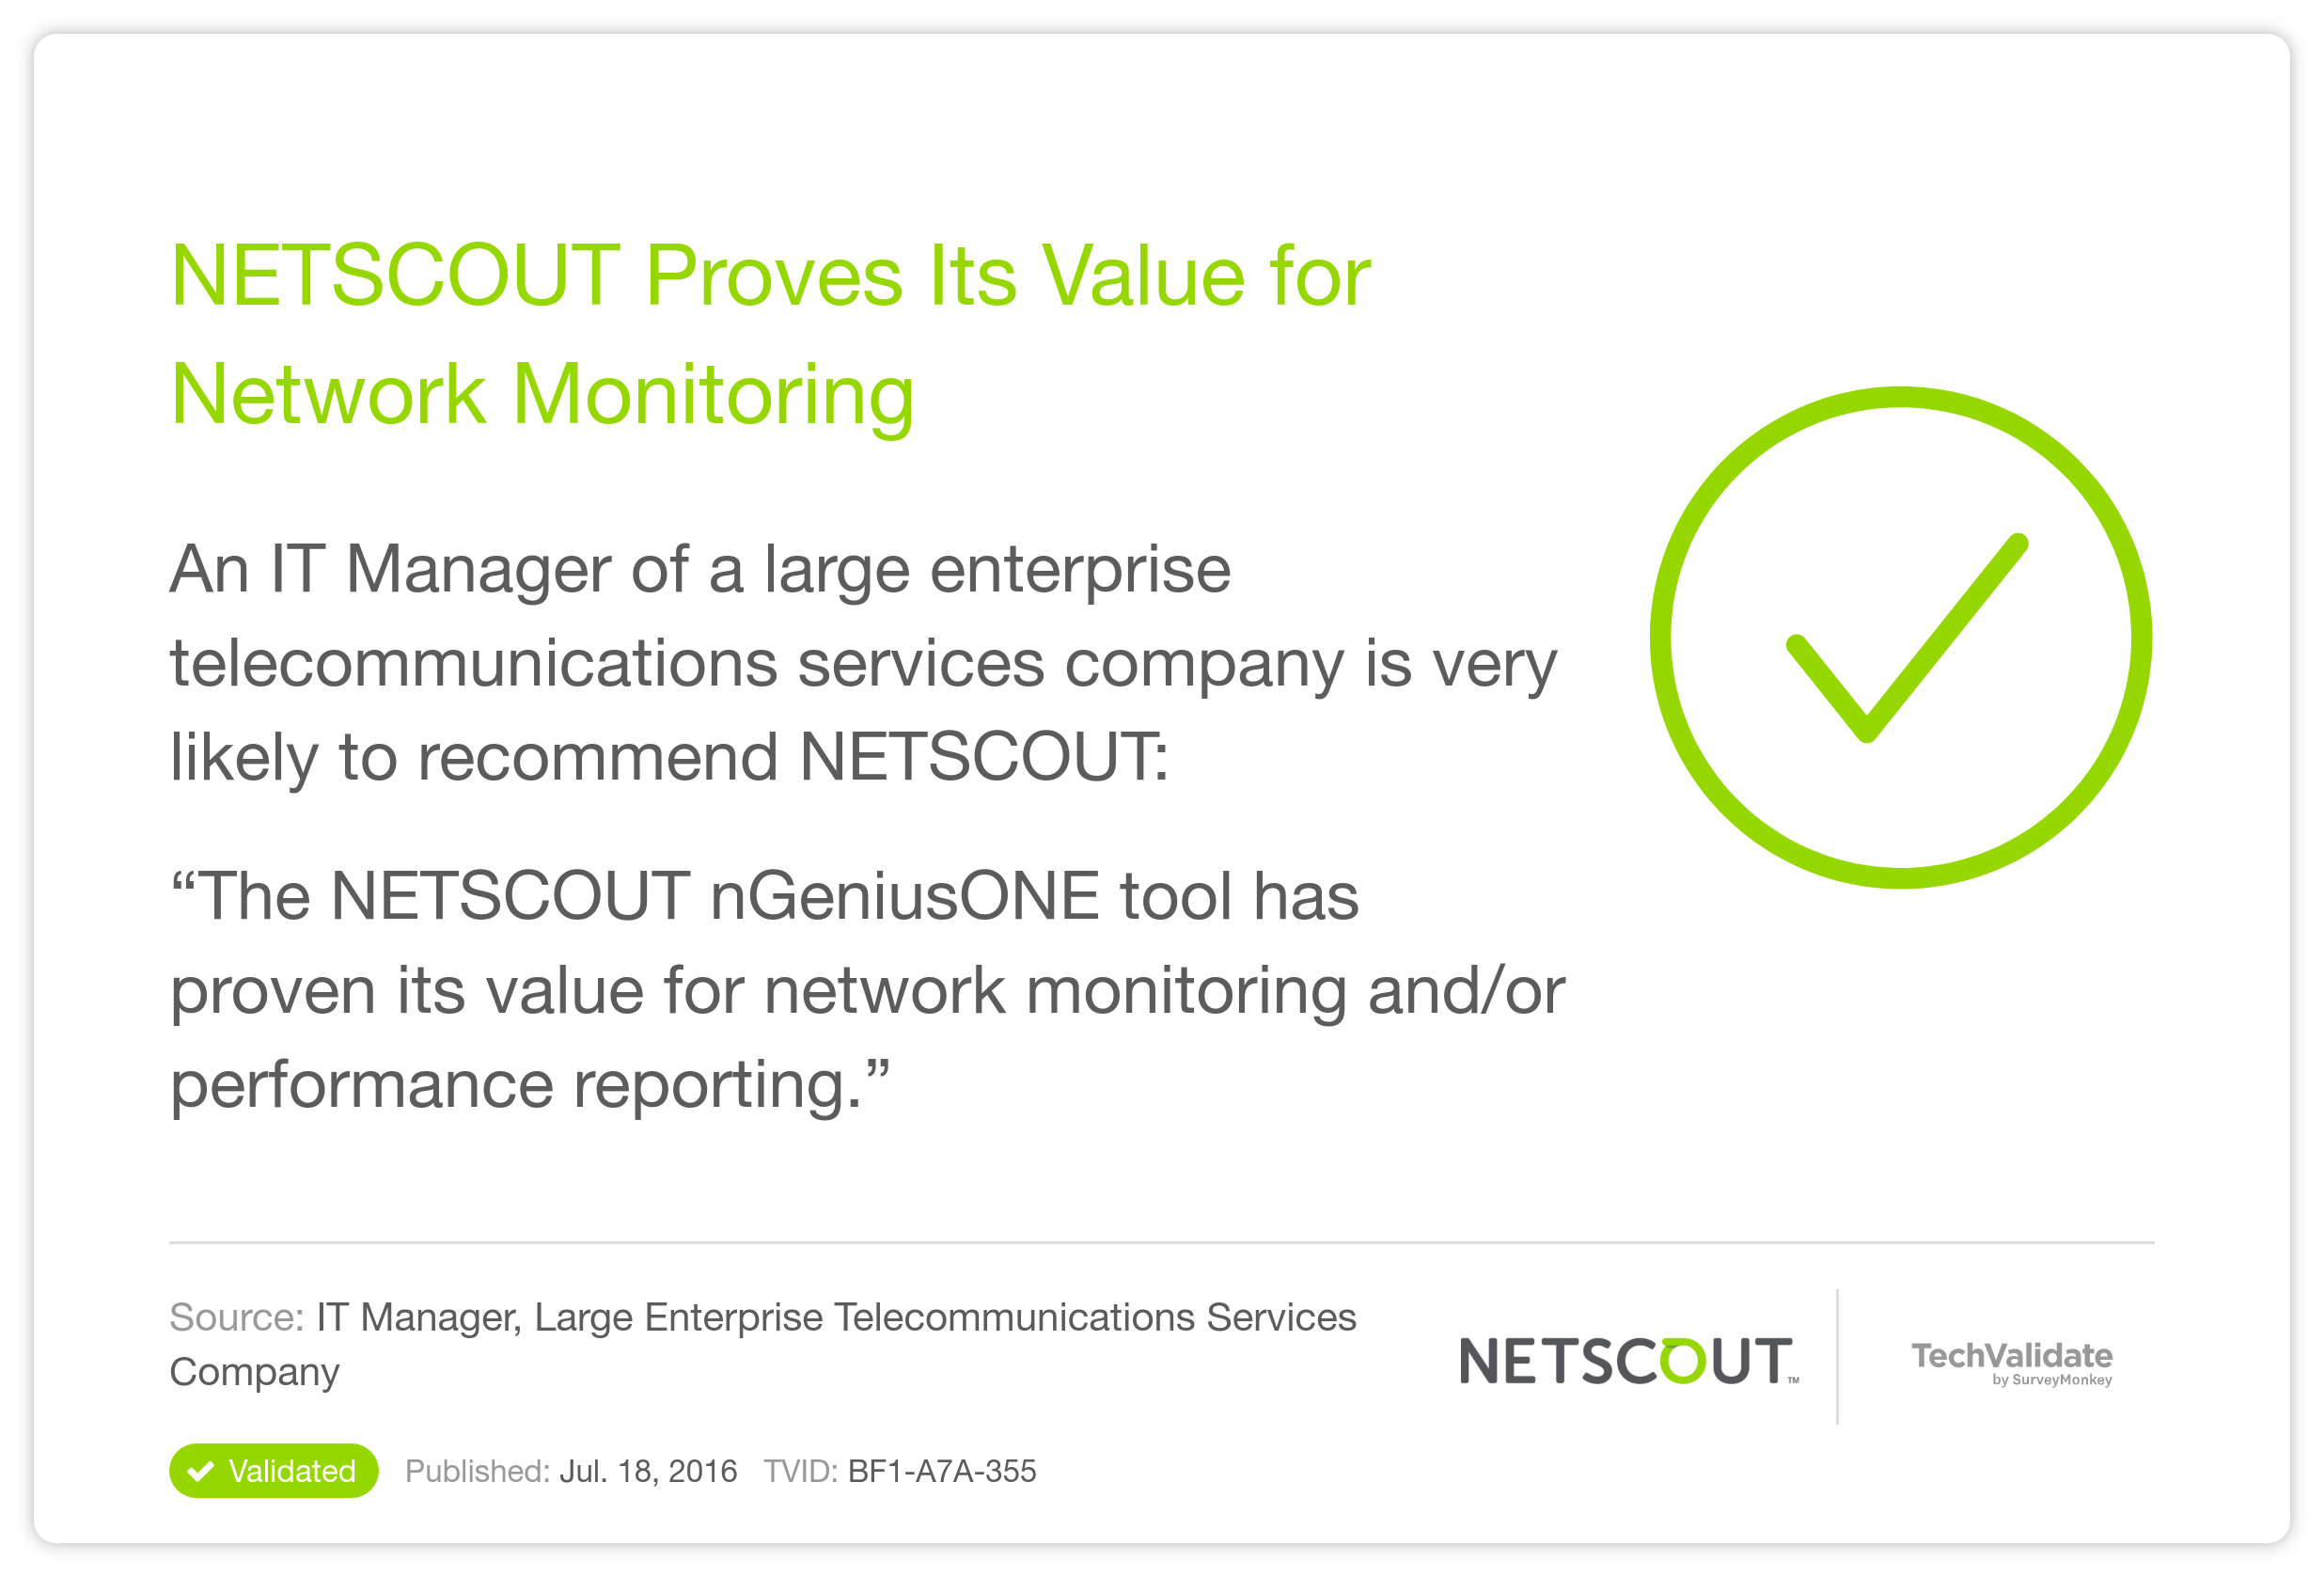 NETSCOUT Proves Its Value for Network Monitoring